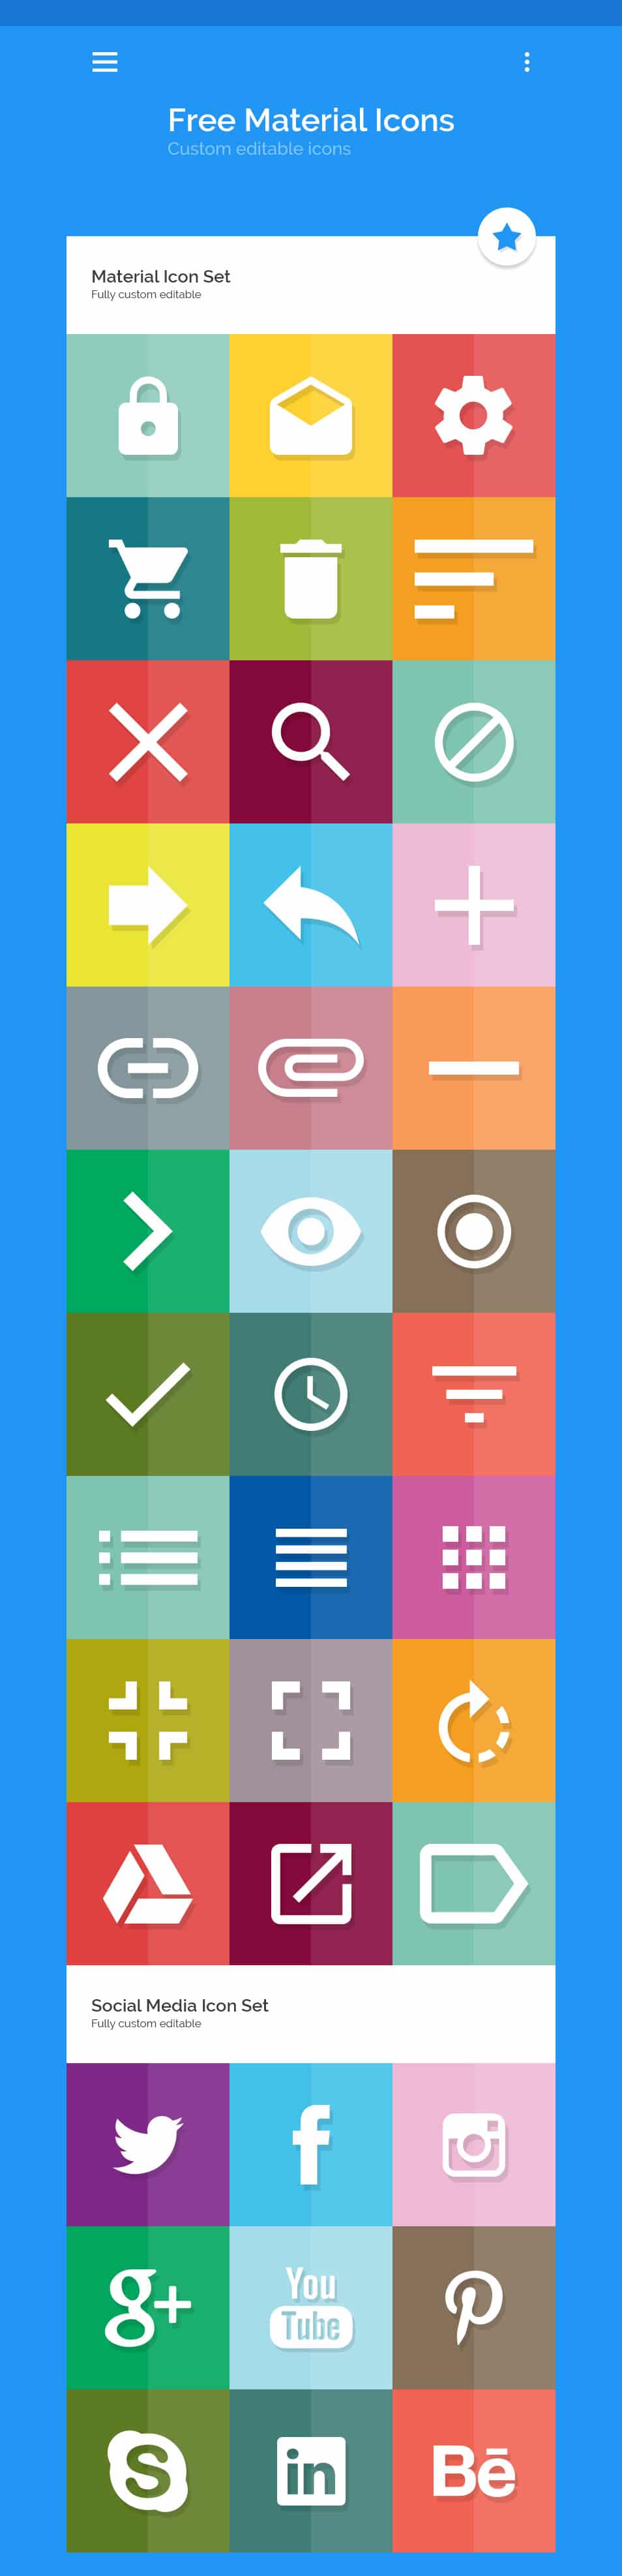 Free Material Icon Set